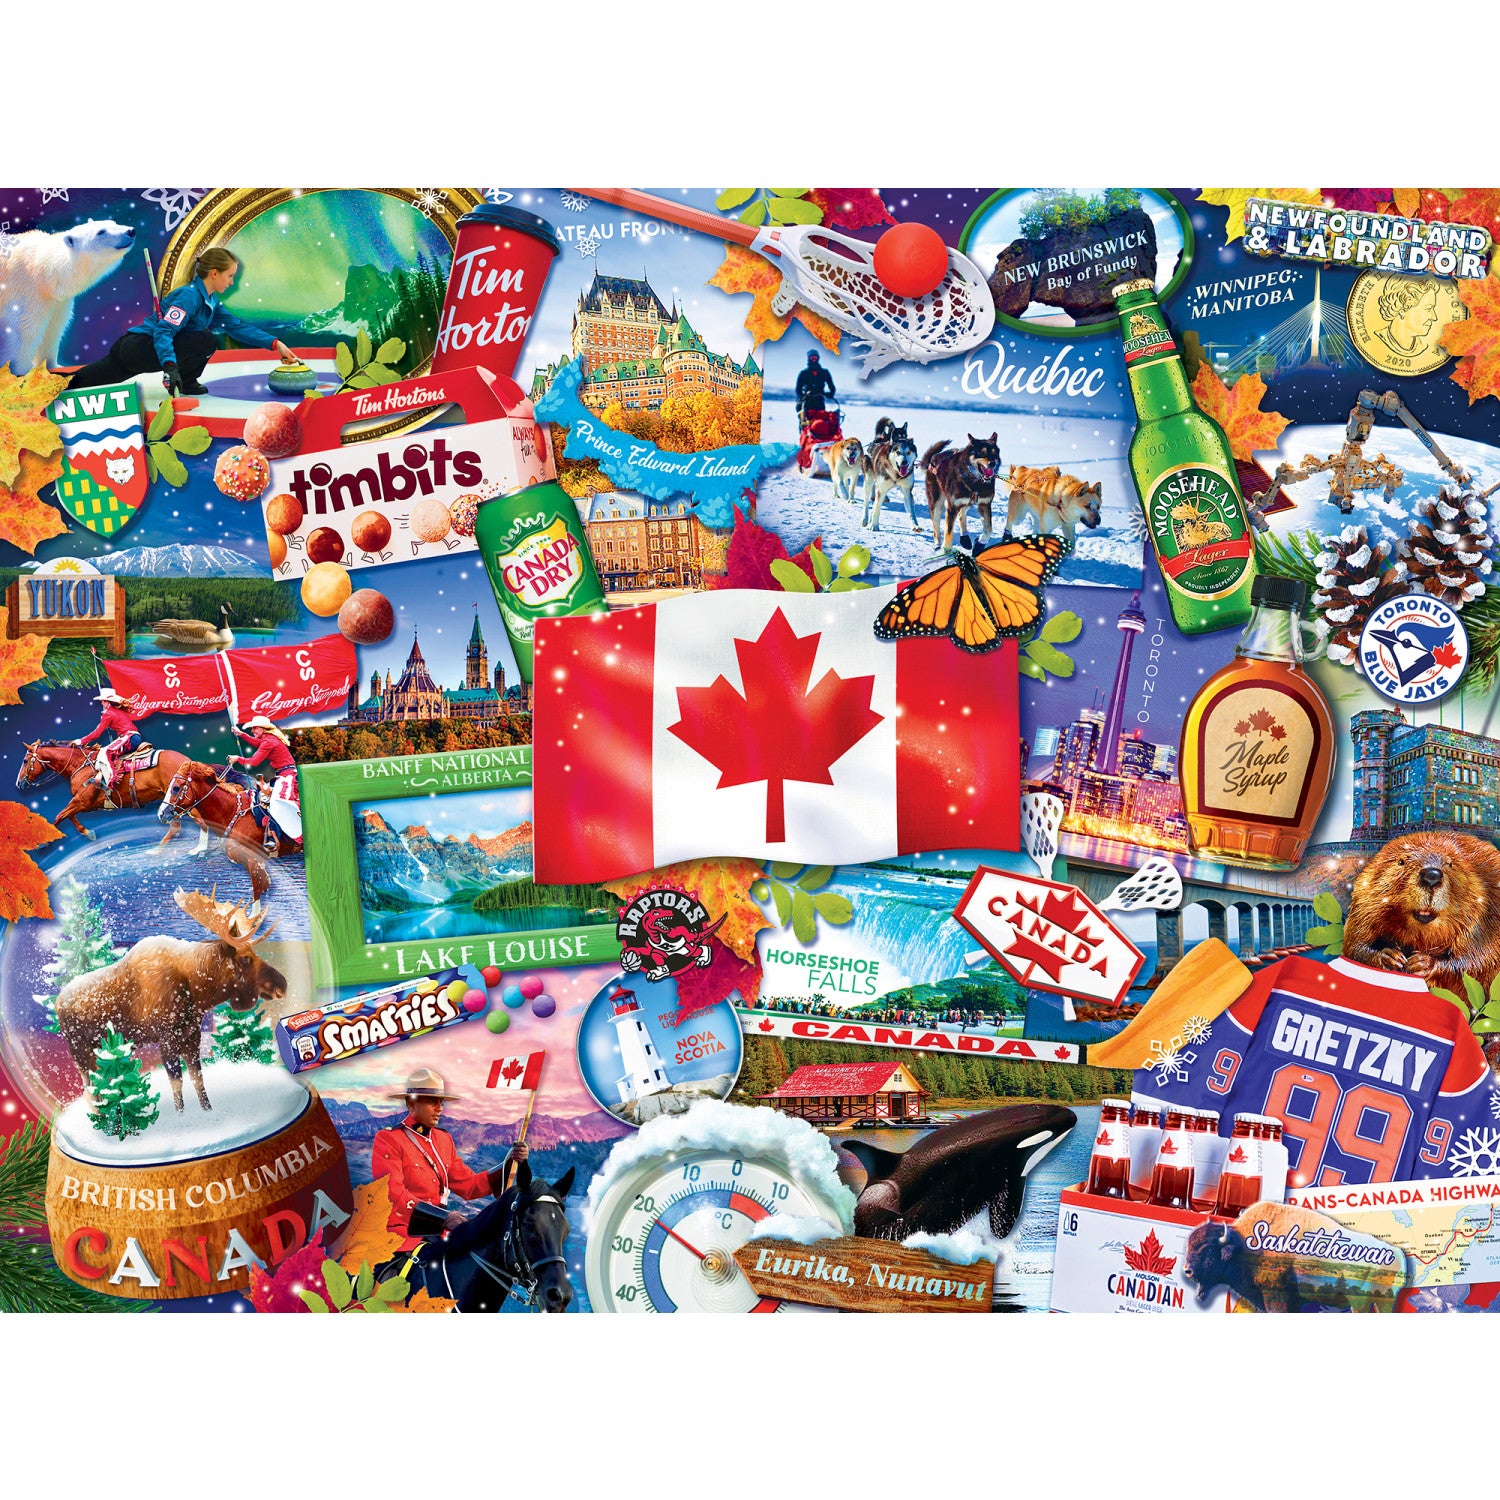 Greetings From - Canada 550 Piece Puzzle